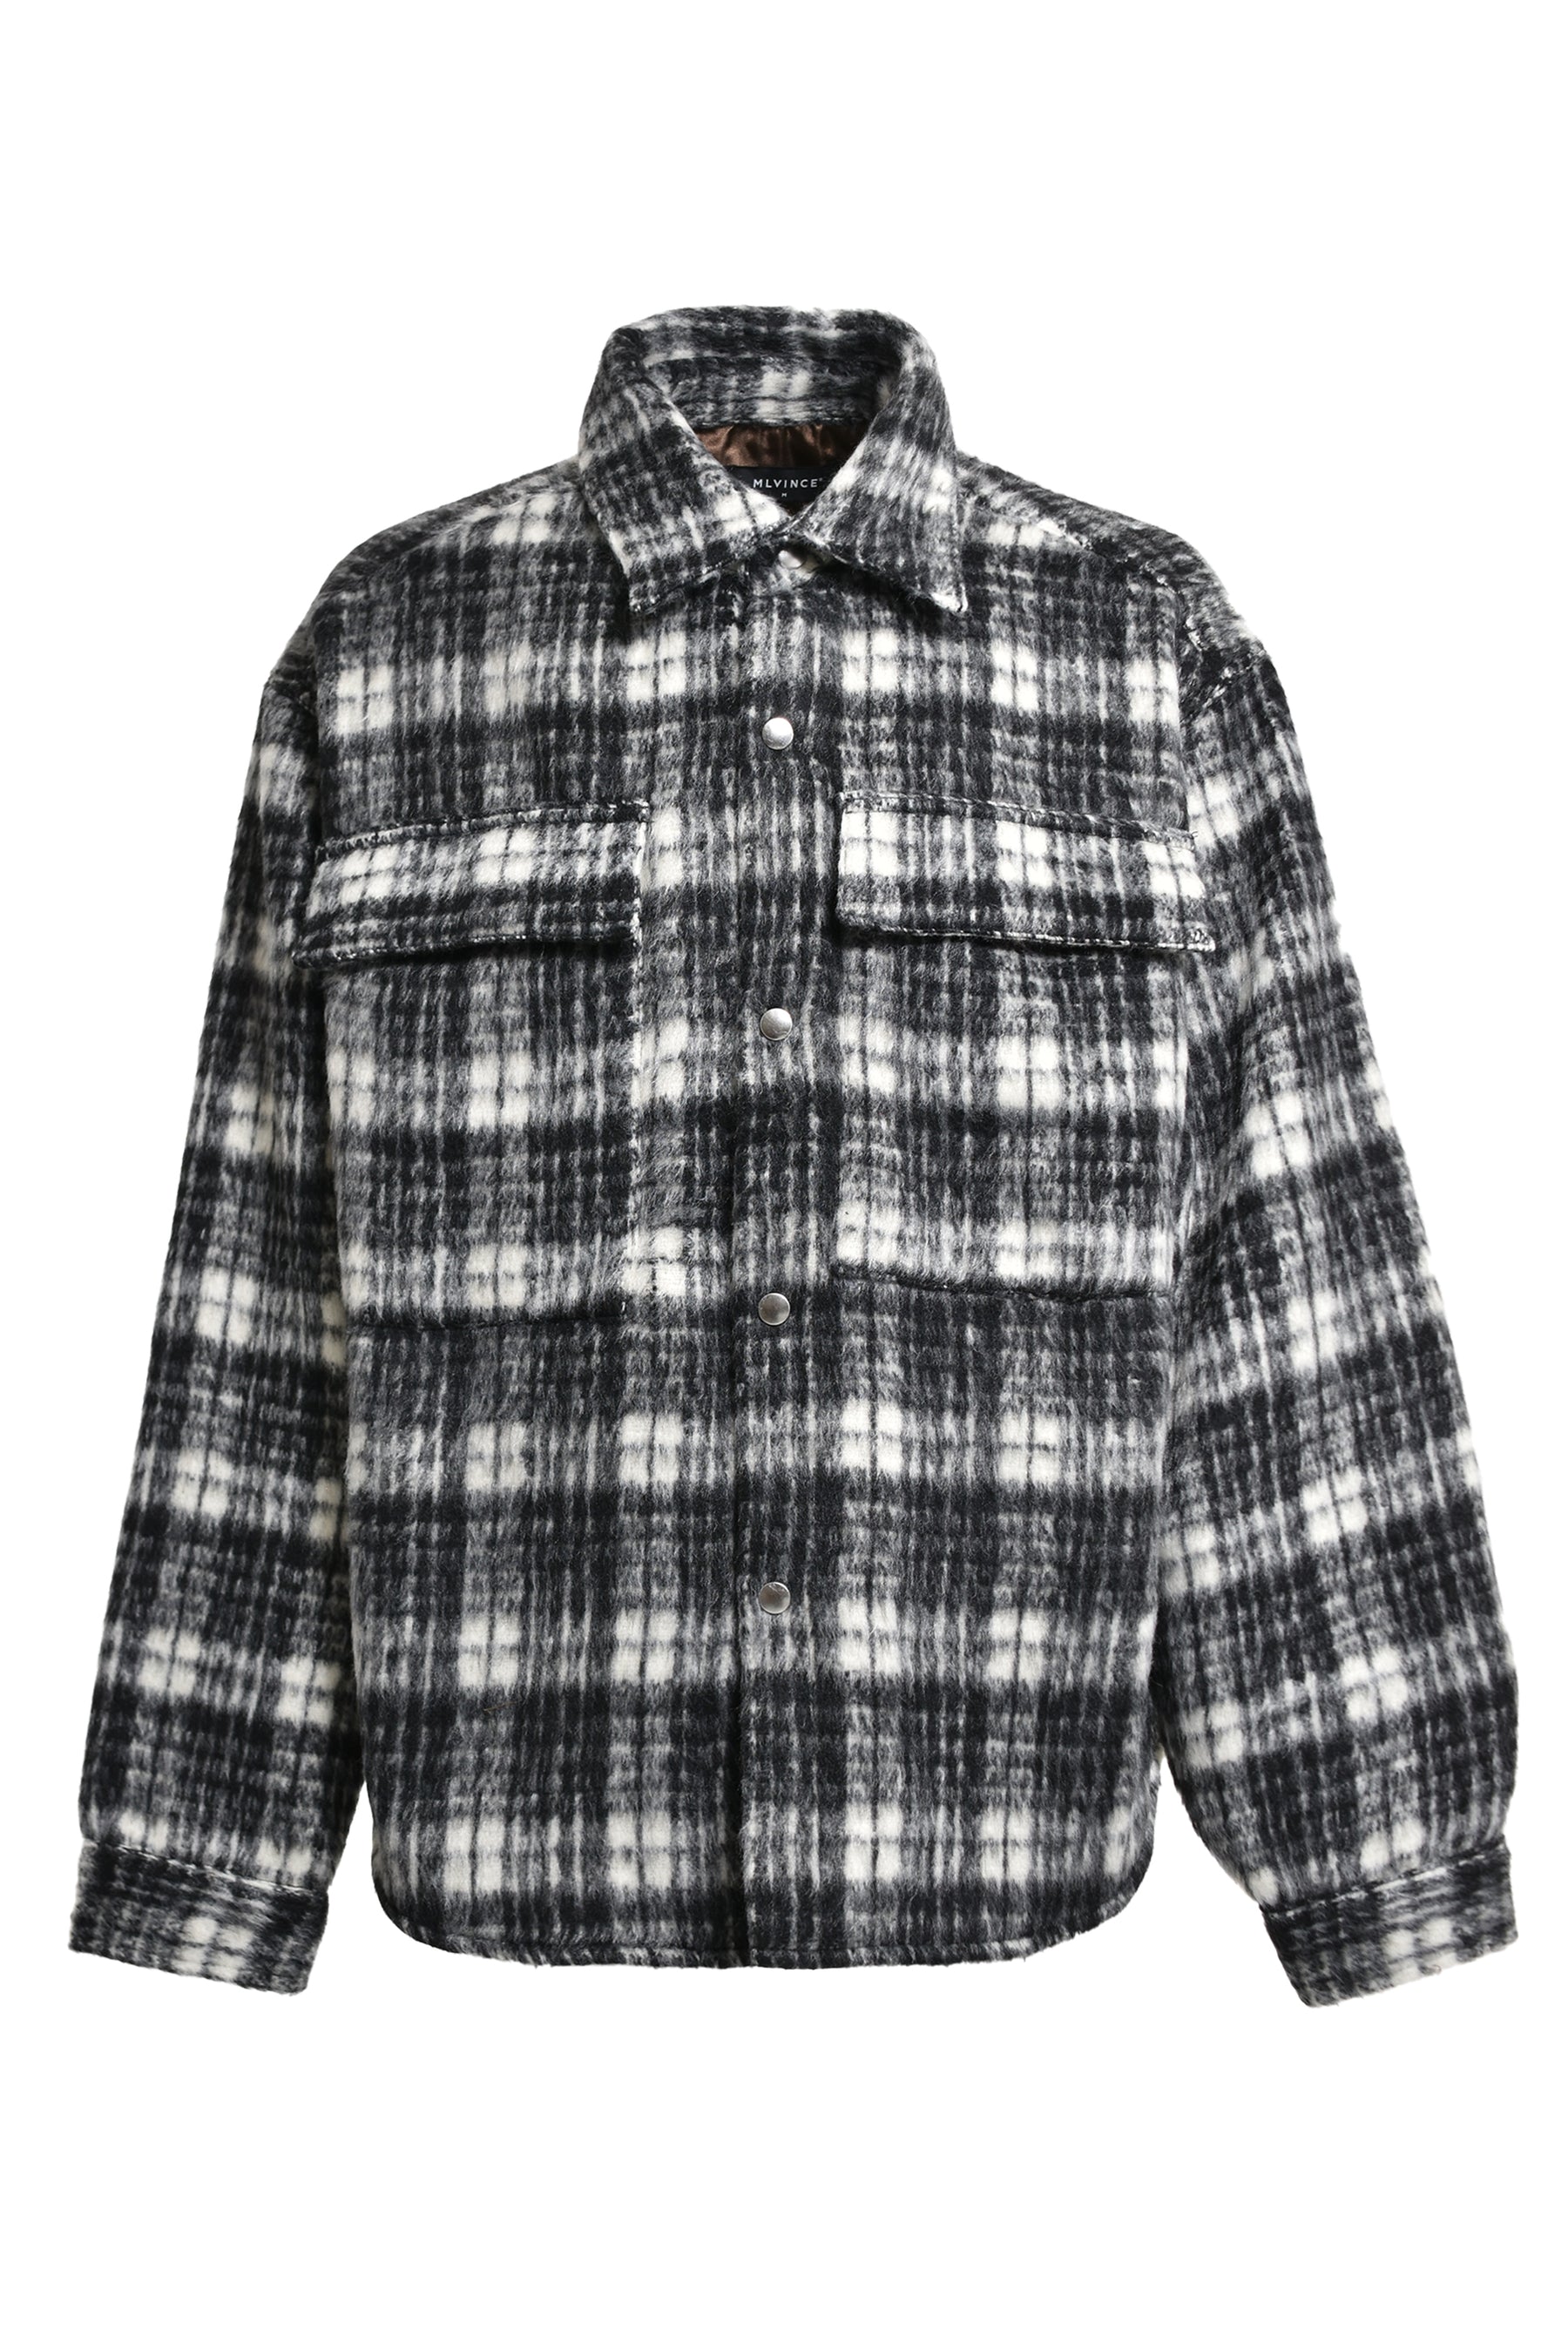 MLVINCE メルヴィンス FW23 OVERSIZED CHECK JACKET / BLK -NUBIAN